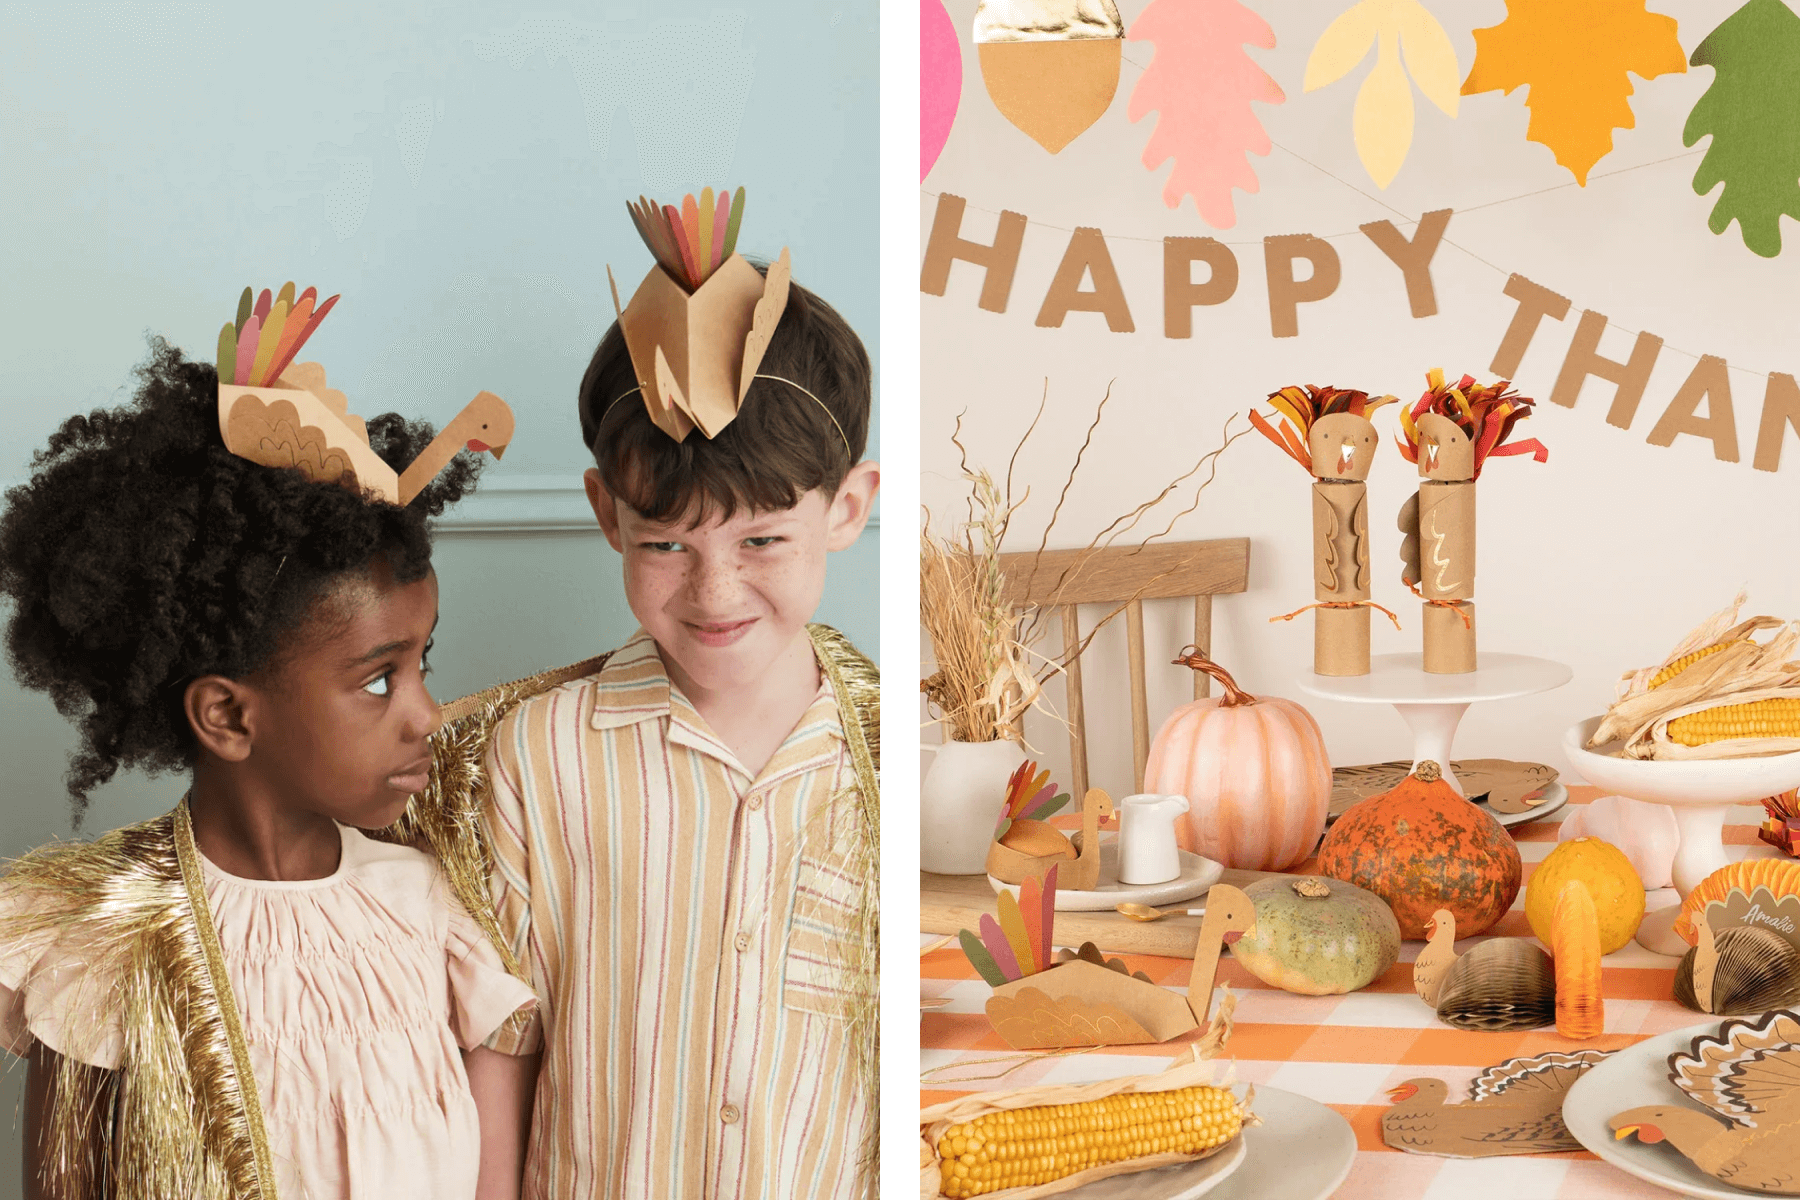 Left: A girl and boy wear paper turkey-shaped hats. Right: A kids’ table with Thanksgiving decorations including gourds and turkey party crackers.